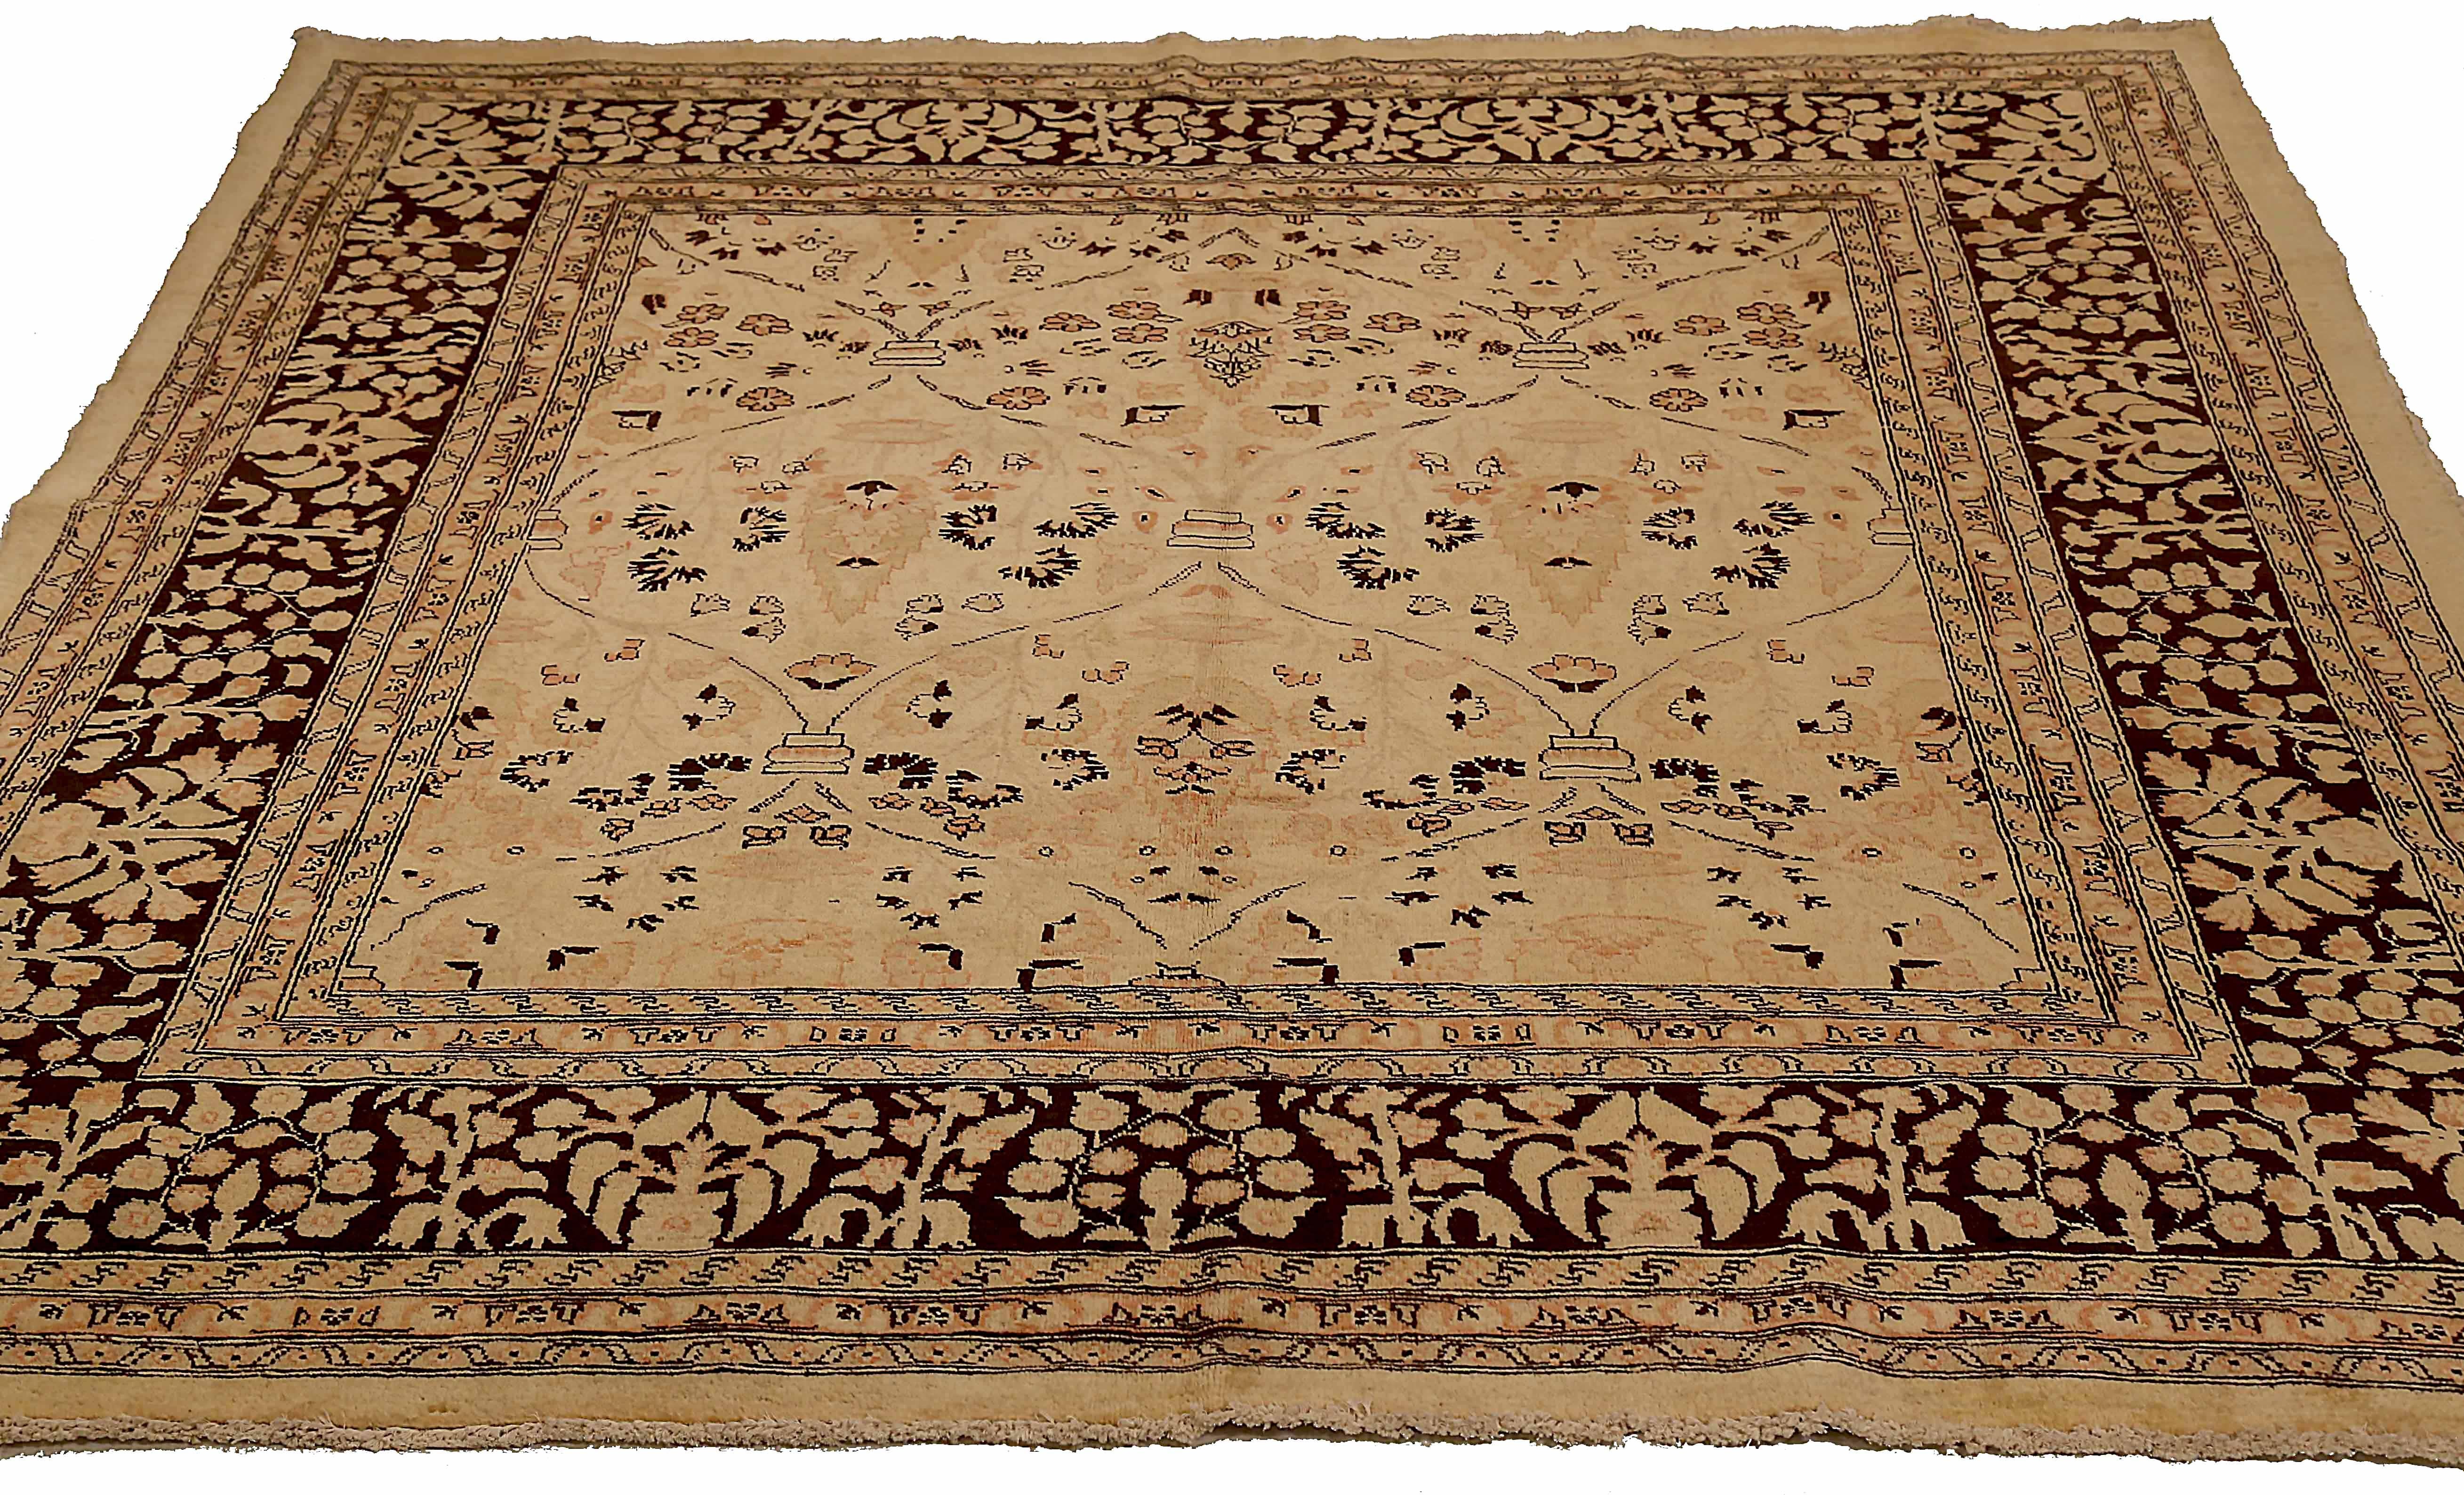 Antique Persian square rug handwoven from the finest sheep’s wool. It’s colored with all-natural vegetable dyes that are safe for humans and pets. It’s a traditional Tabriz design handwoven by expert artisans. It’s a lovely square rug that can be